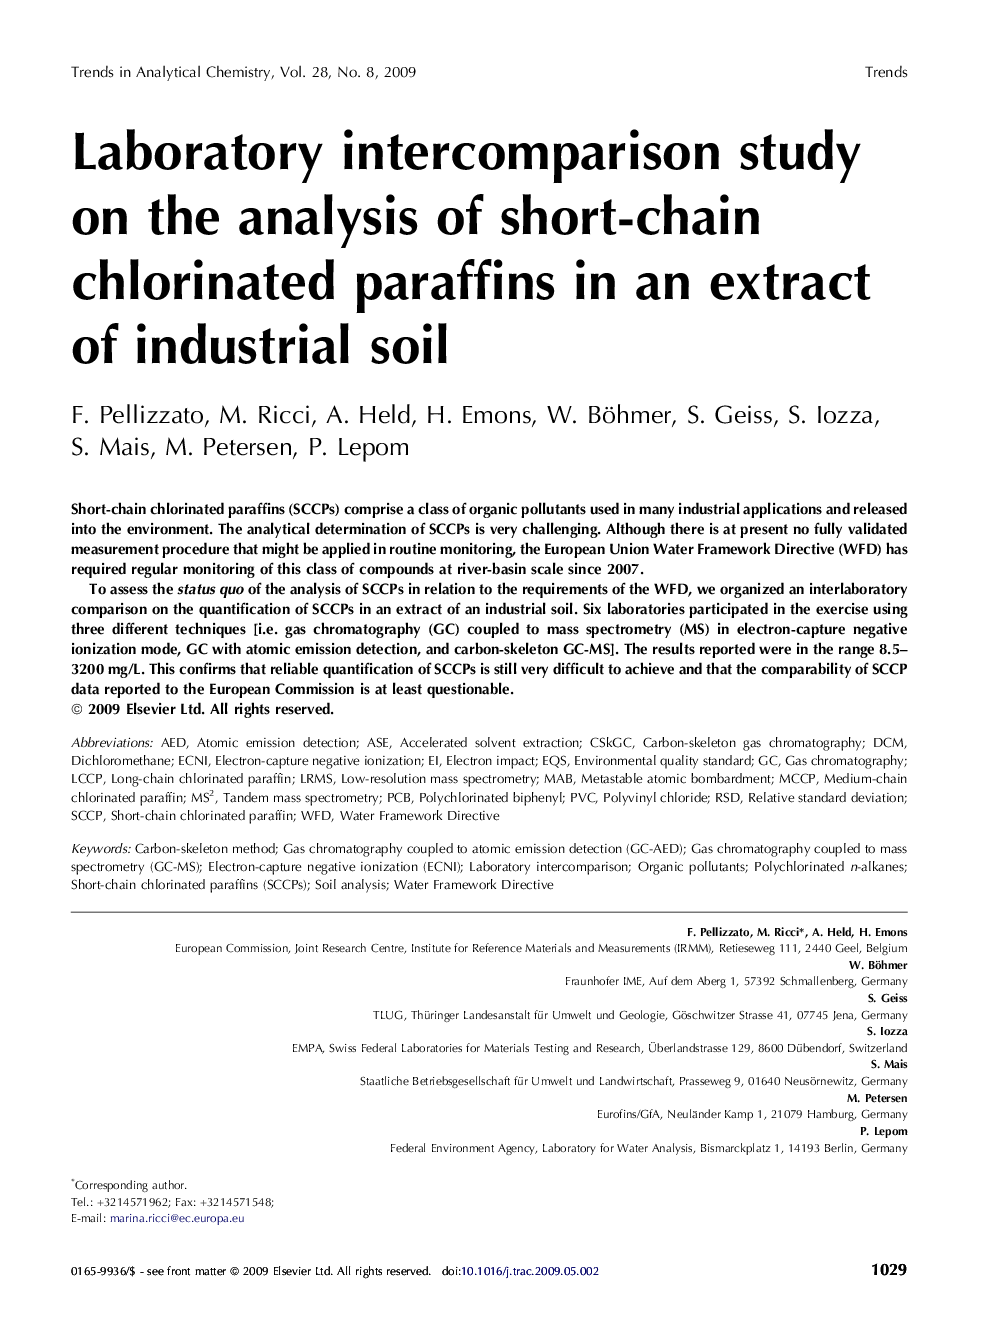 Laboratory intercomparison study on the analysis of short-chain chlorinated paraffins in an extract of industrial soil